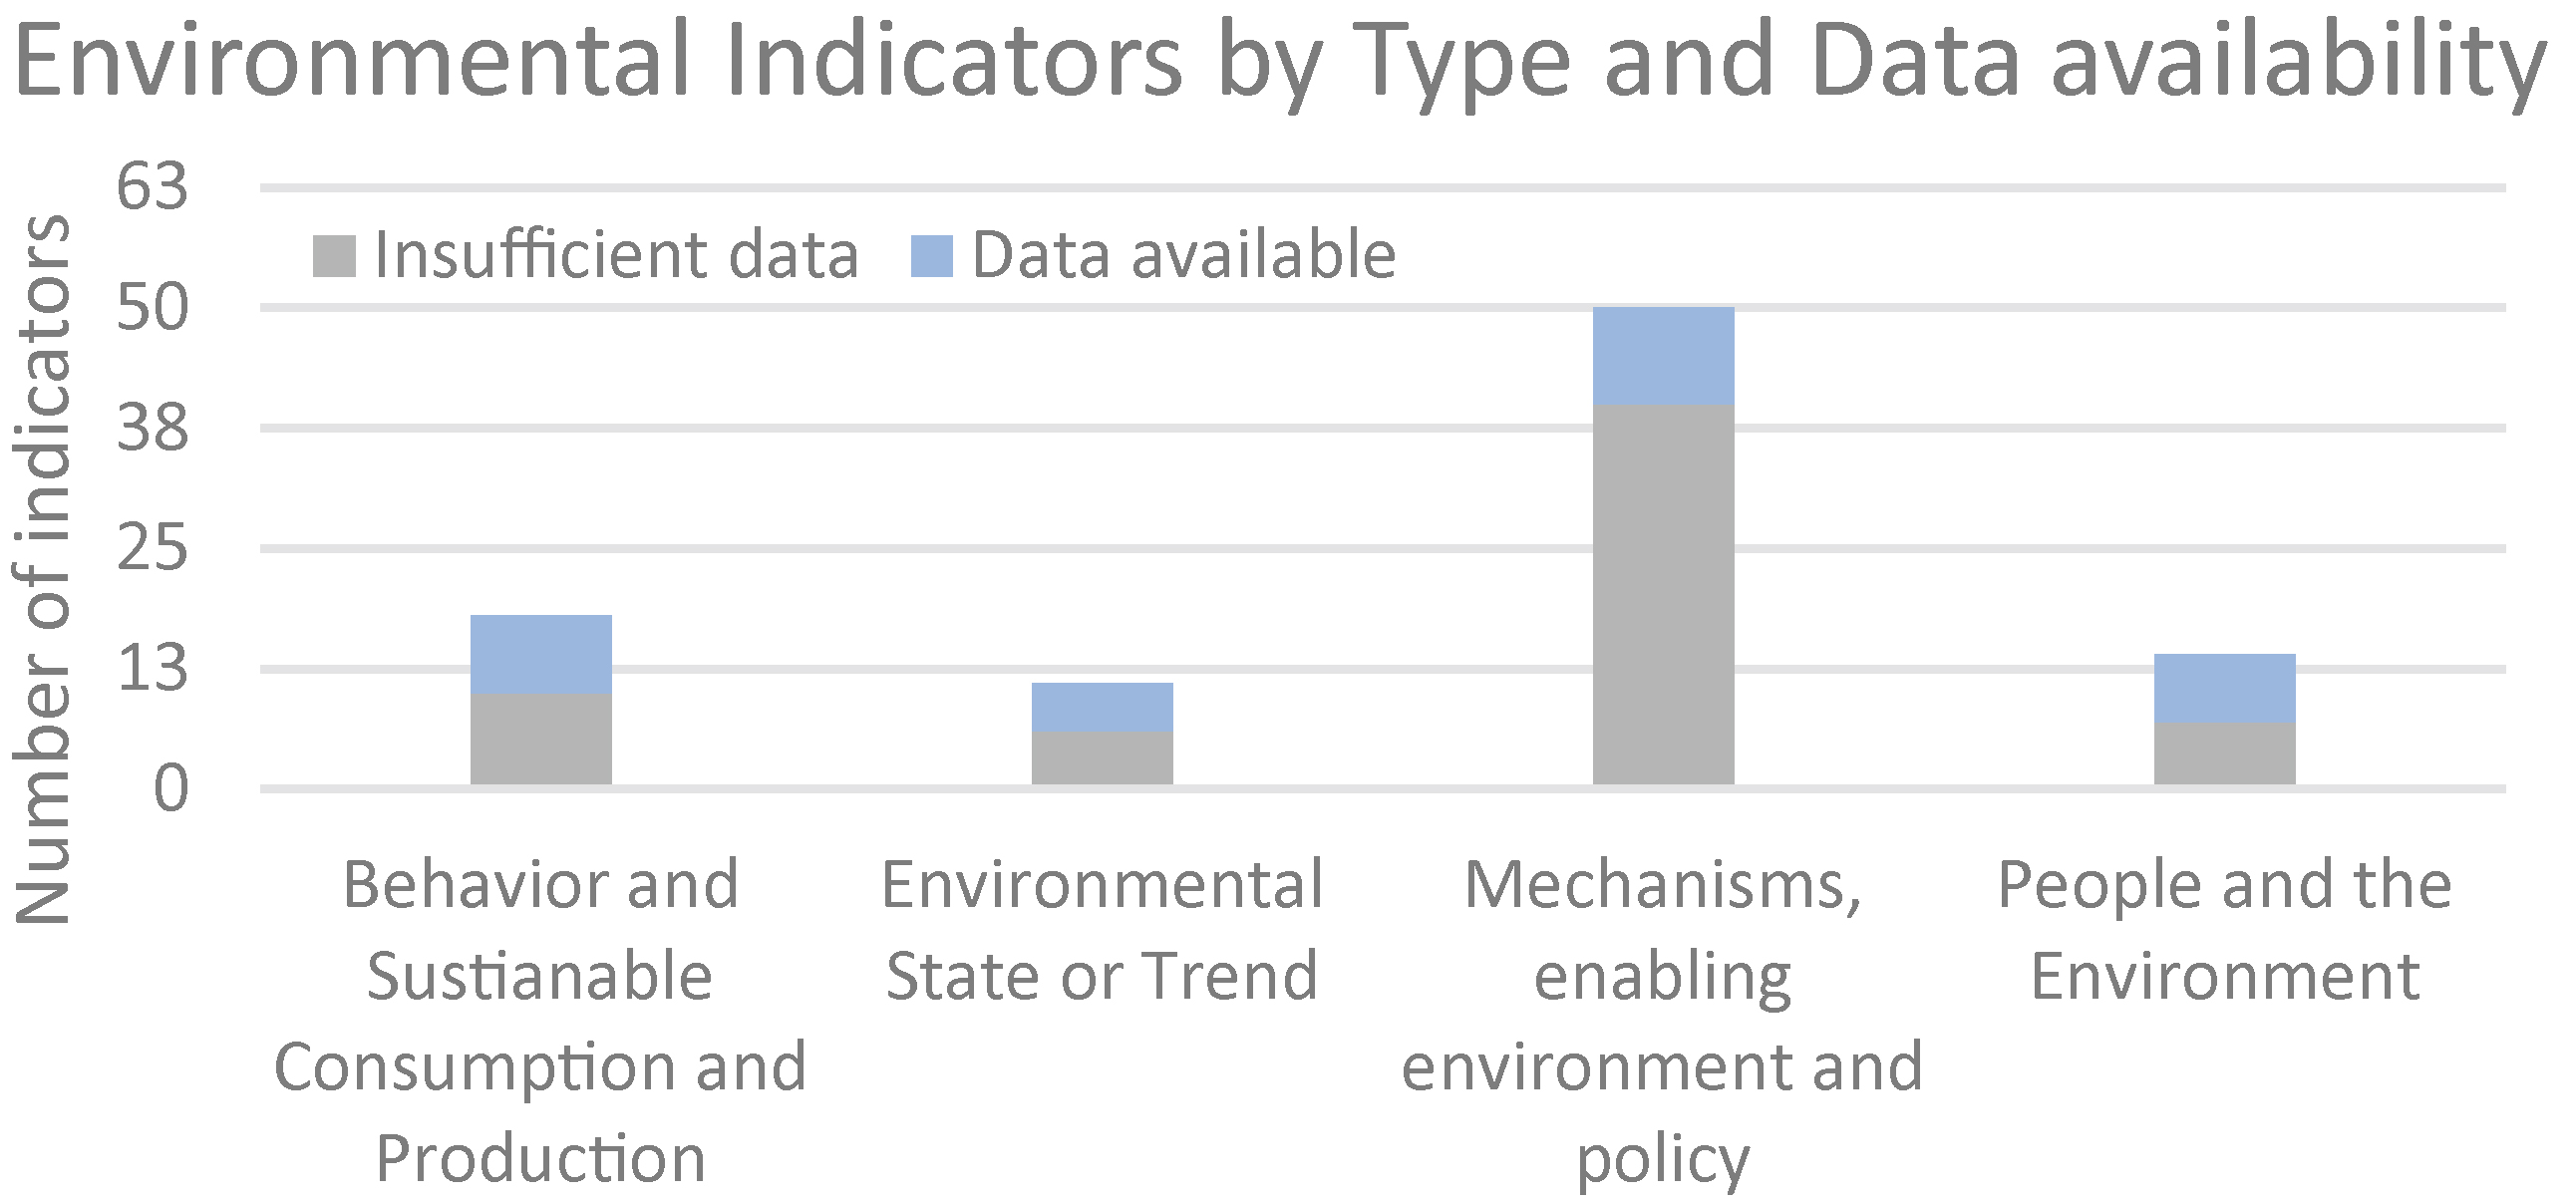 Total number of environmental Indicators by type and data availability, 2019.